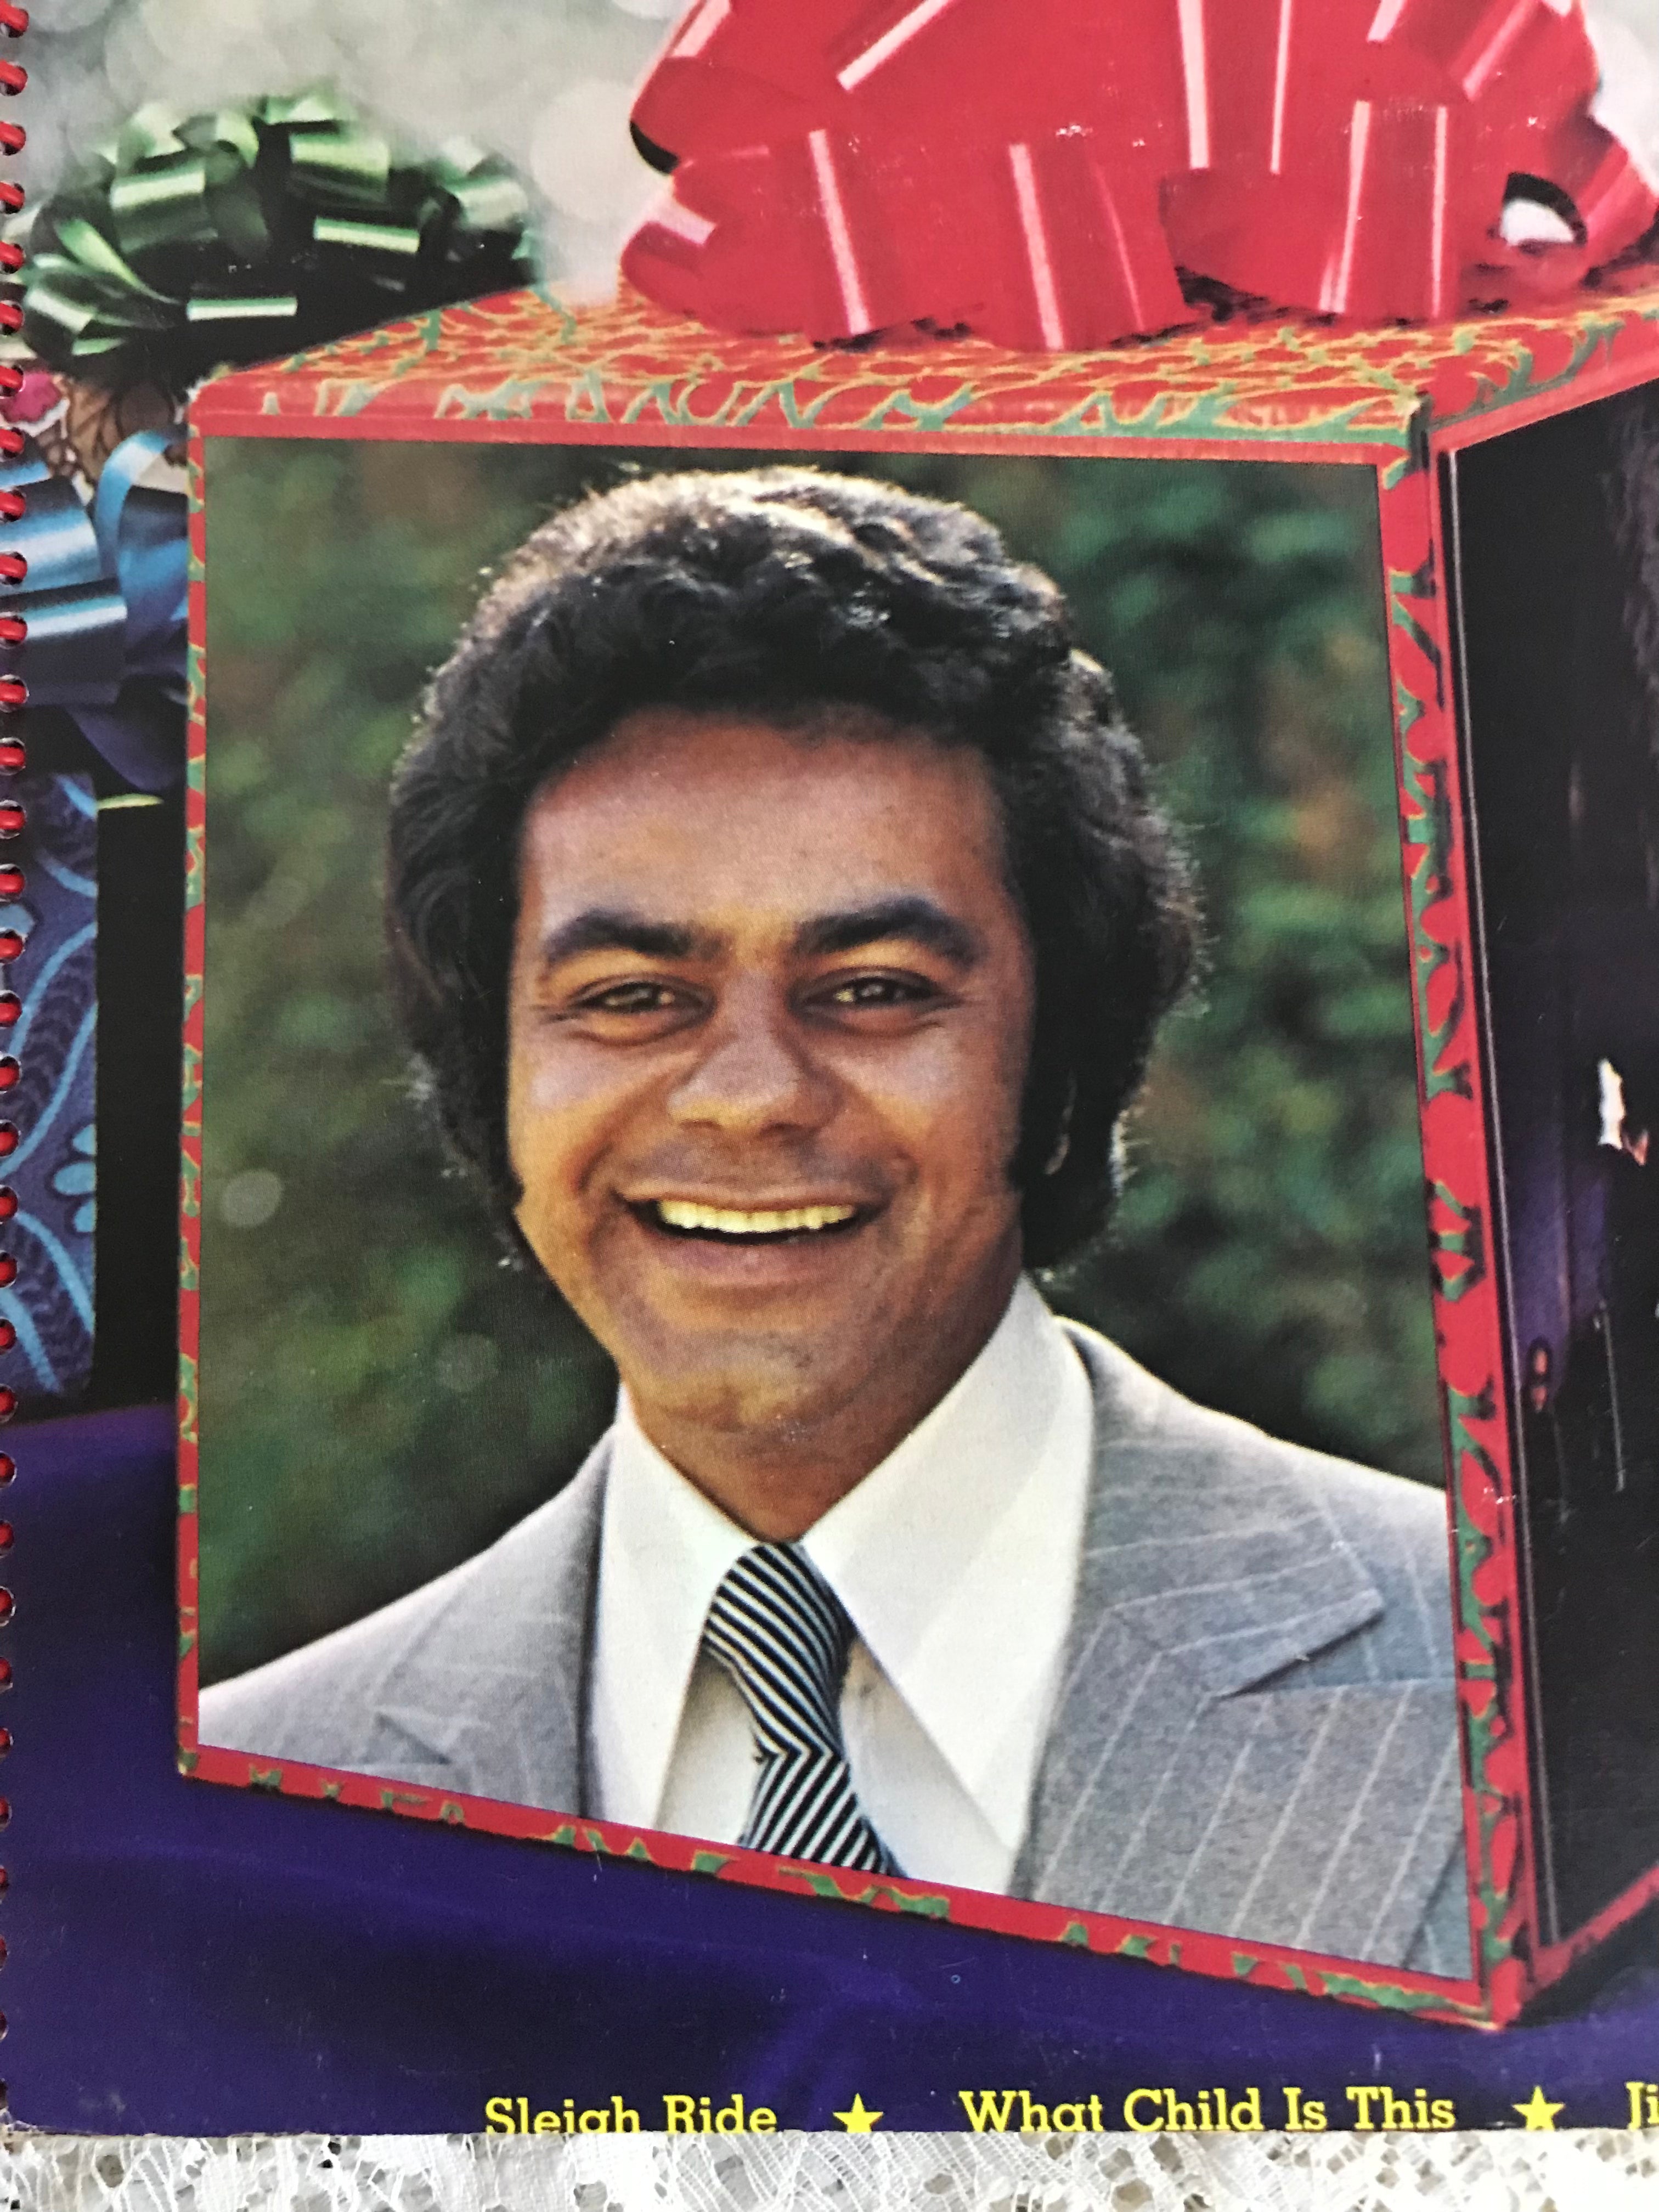 Christmas with Johnny Mathis and Percy Faith Album Cover Notebook